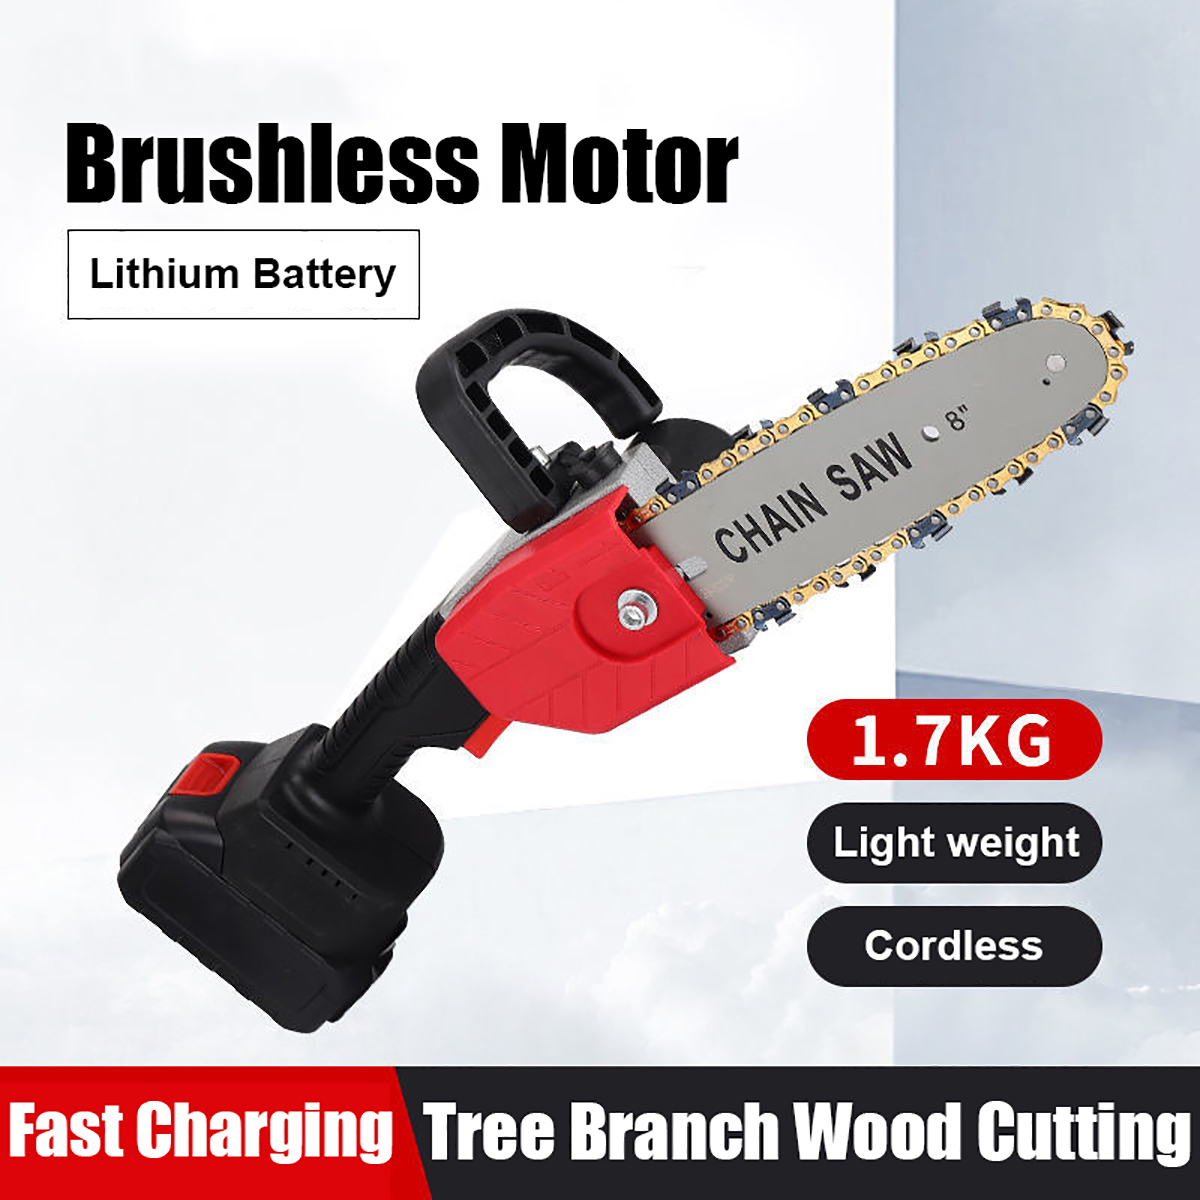 Mini-Chainsaw-8-Inch-21V-Portable-Brushless-Cordless-Electric-Chain-Saw-Handheld-Pruning-Shears-Chai-1795044-2